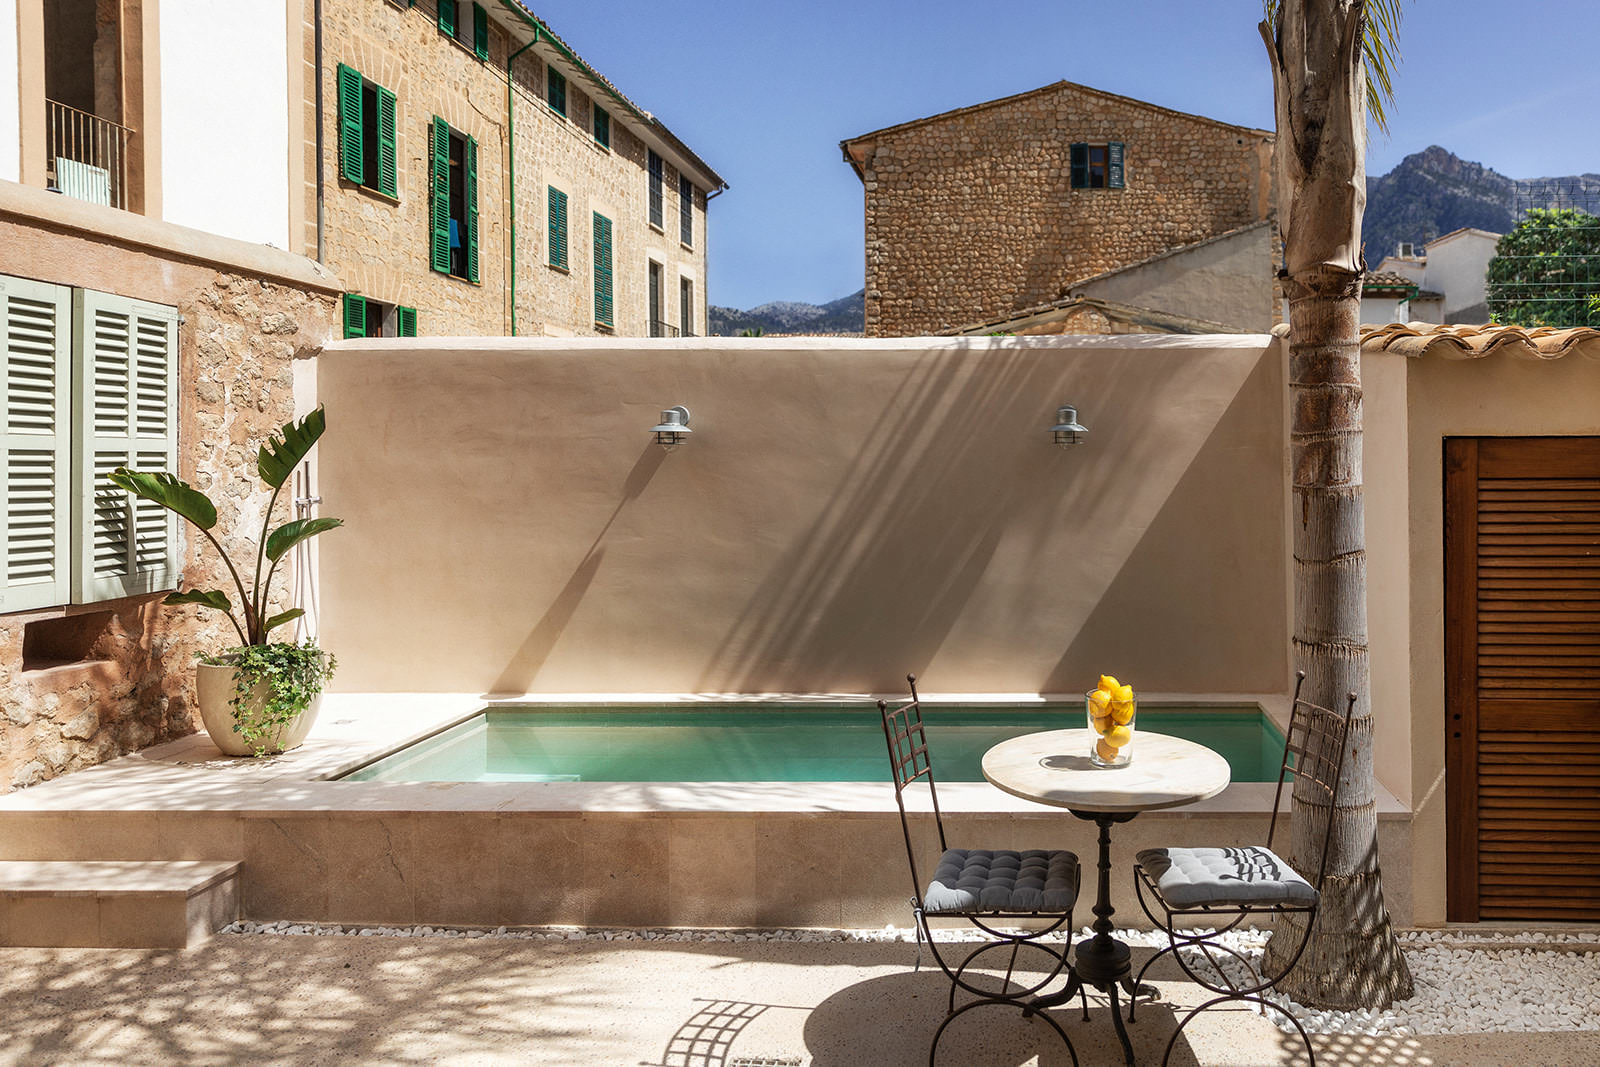 Ecocirer is an eco &  vegan in the heart of Soller, Mallorca // Photo Credit Ecocirer